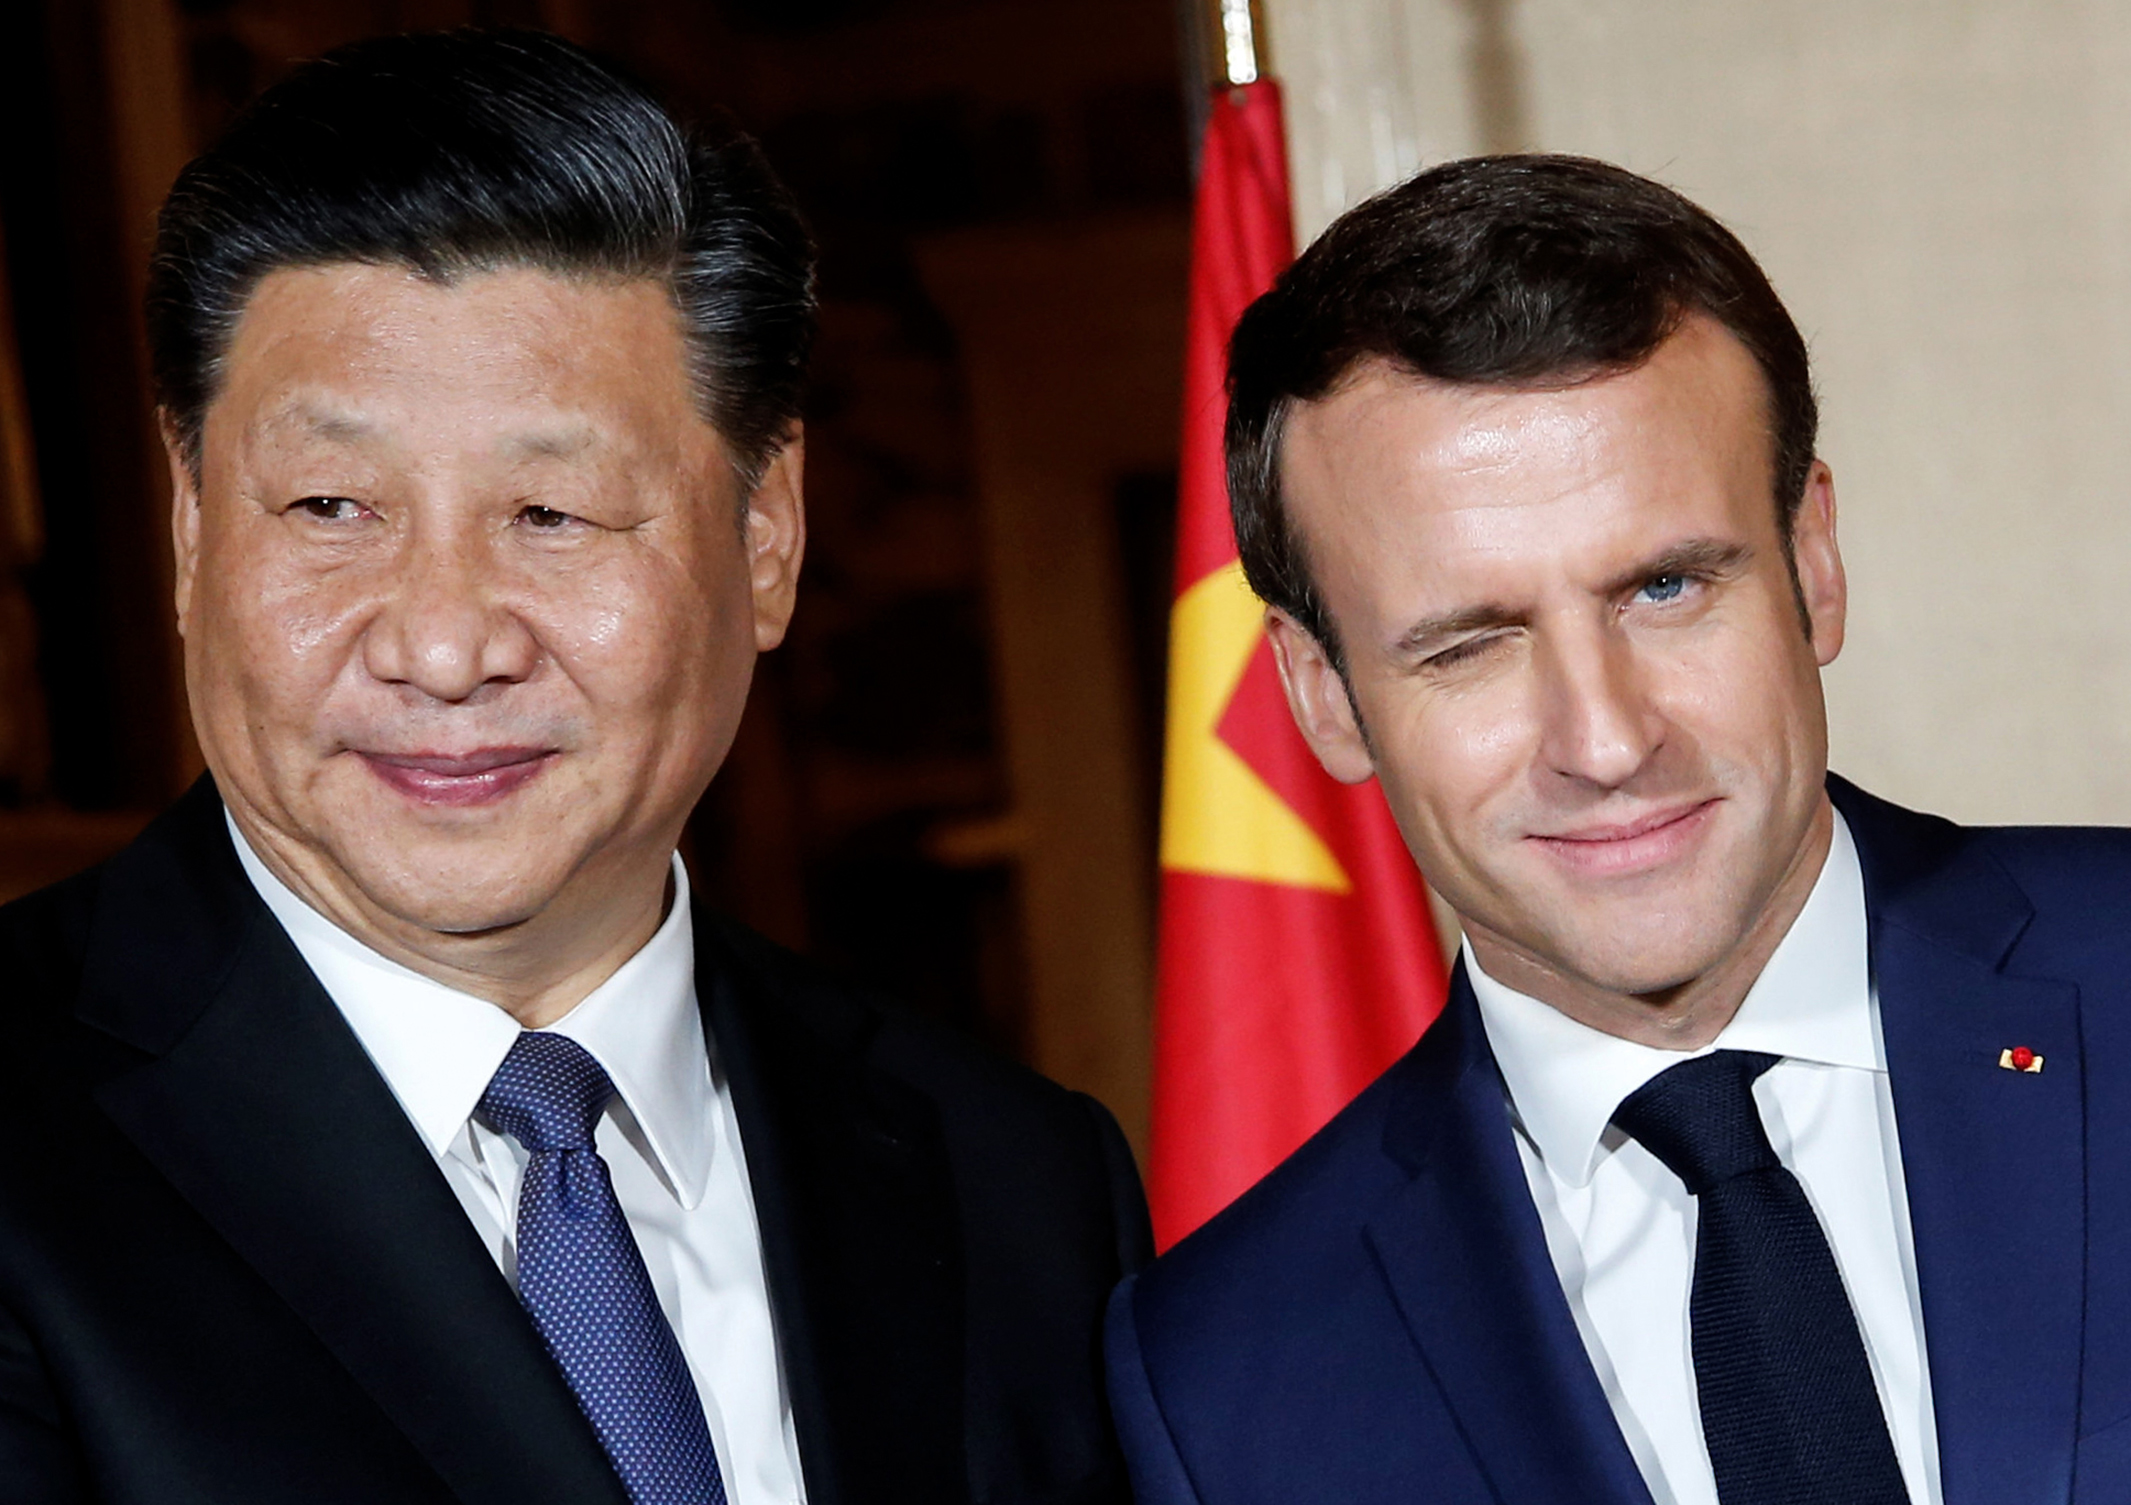 TOPSHOT - French President Emmanuel Macron (R) shakes hand with China's President Xi Jinping as they arrive at the Villa Kerylos before a dinner on March 24, 2019 in Beaulieu-sur-Mer, near Nice on the French riviera. (Photo by JEAN-PAUL PELISSIER / POOL / AFP)